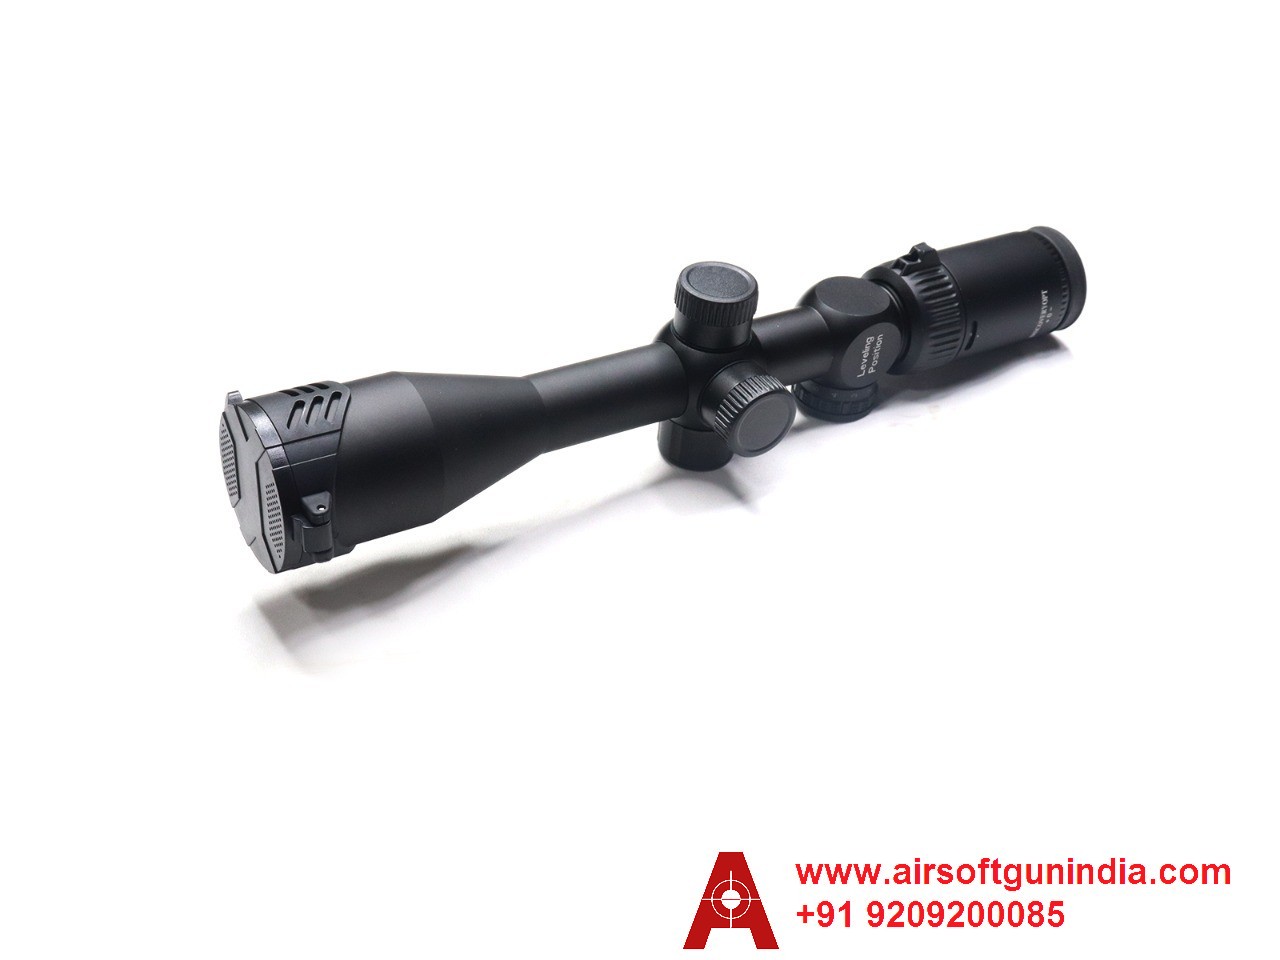 DISCOVERY OPT (VT-R 3-9X40 IRAC) Scope For Air Rifle By Airsoft Gun India